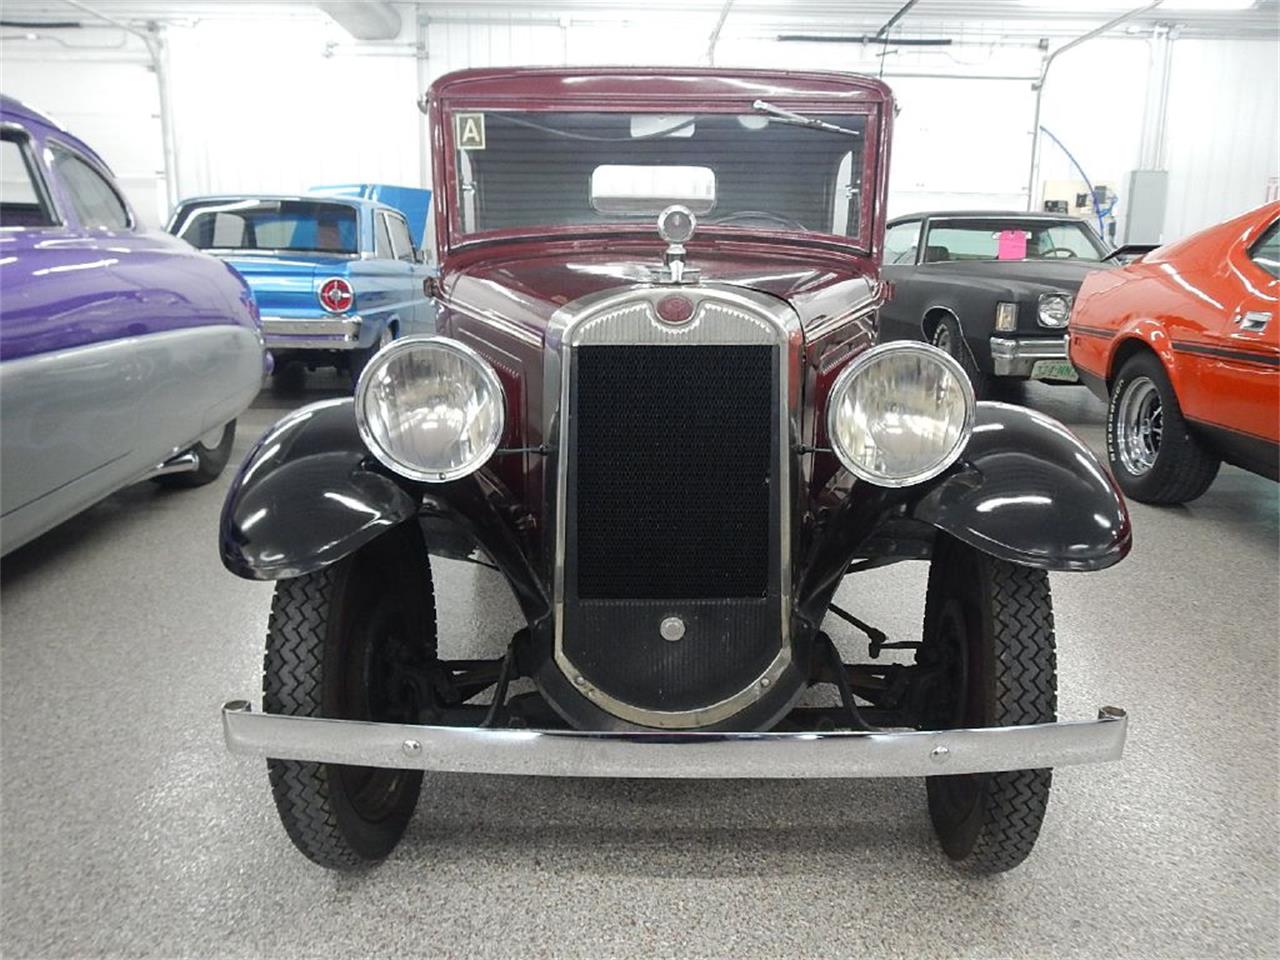 1934 American Bantam Automobile for sale in Celina, OH